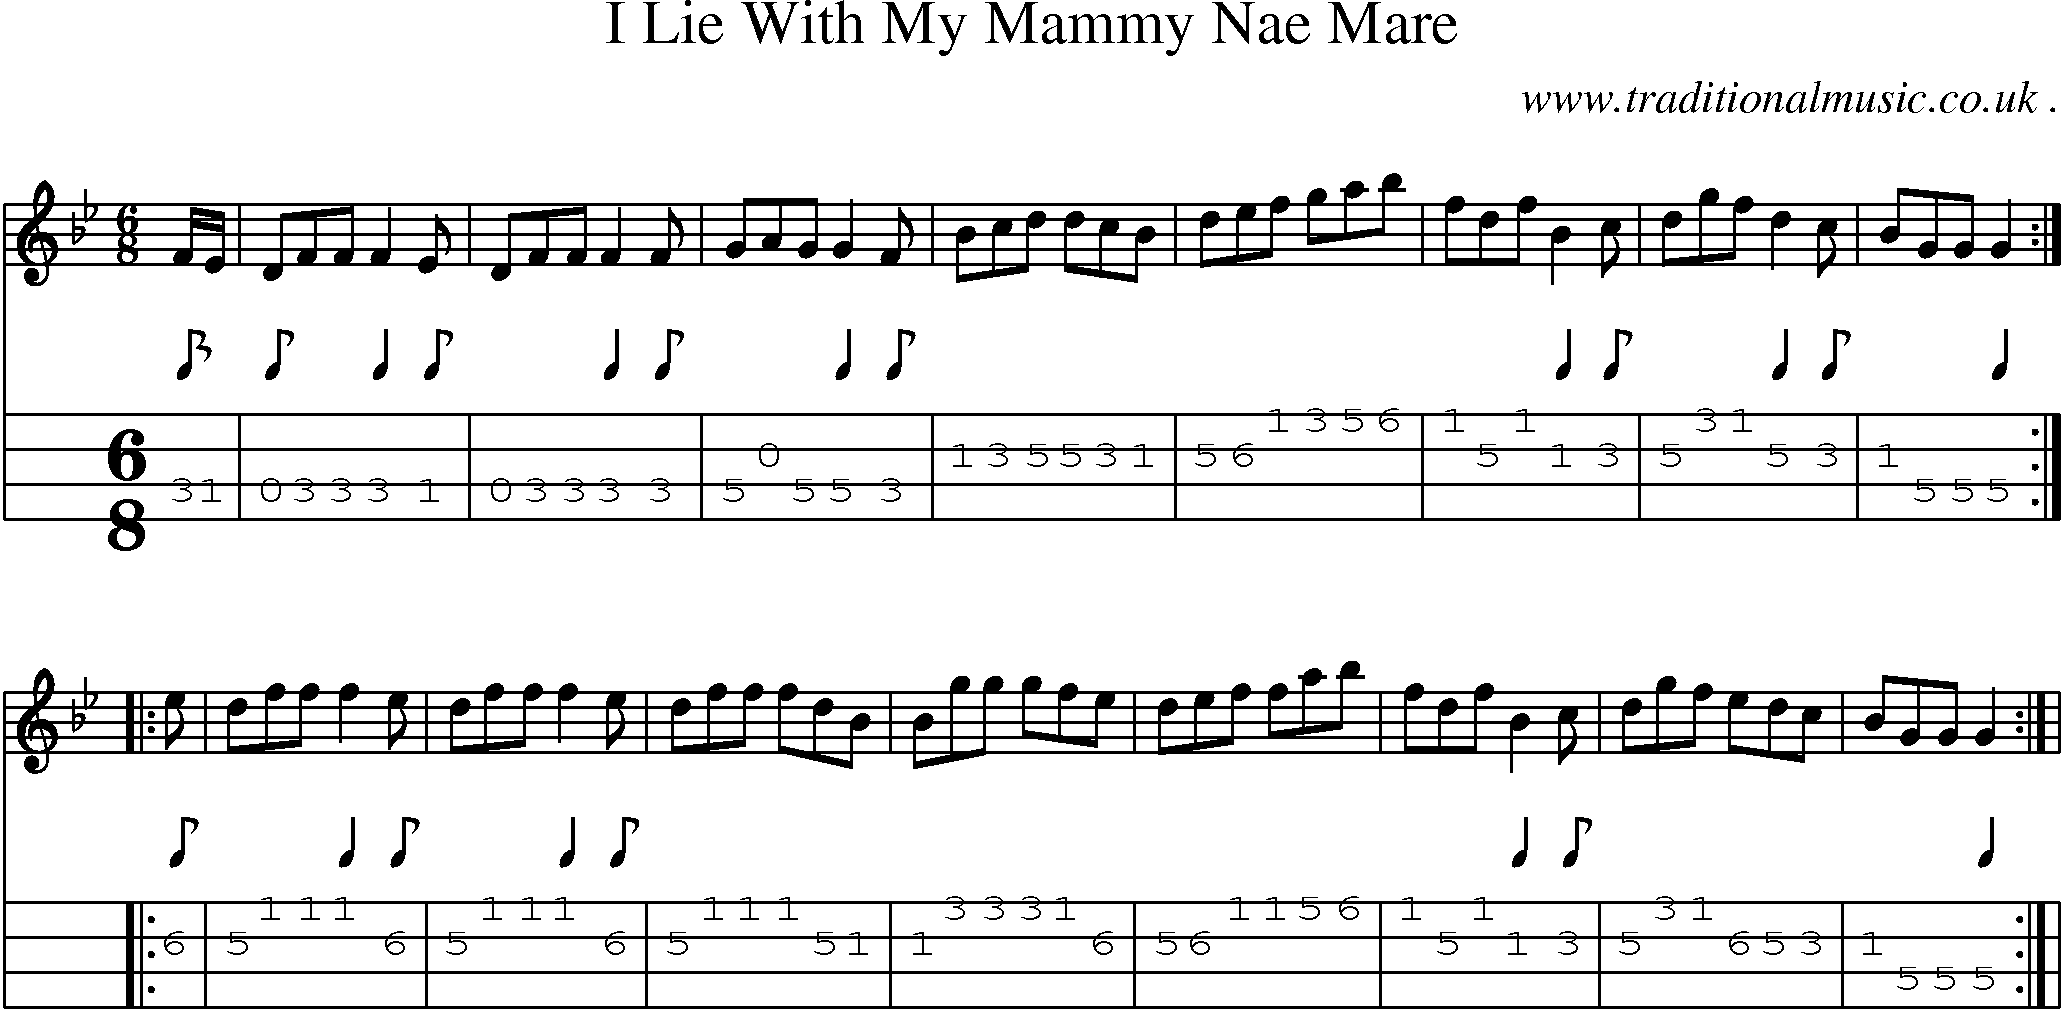 Sheet-Music and Mandolin Tabs for I Lie With My Mammy Nae Mare